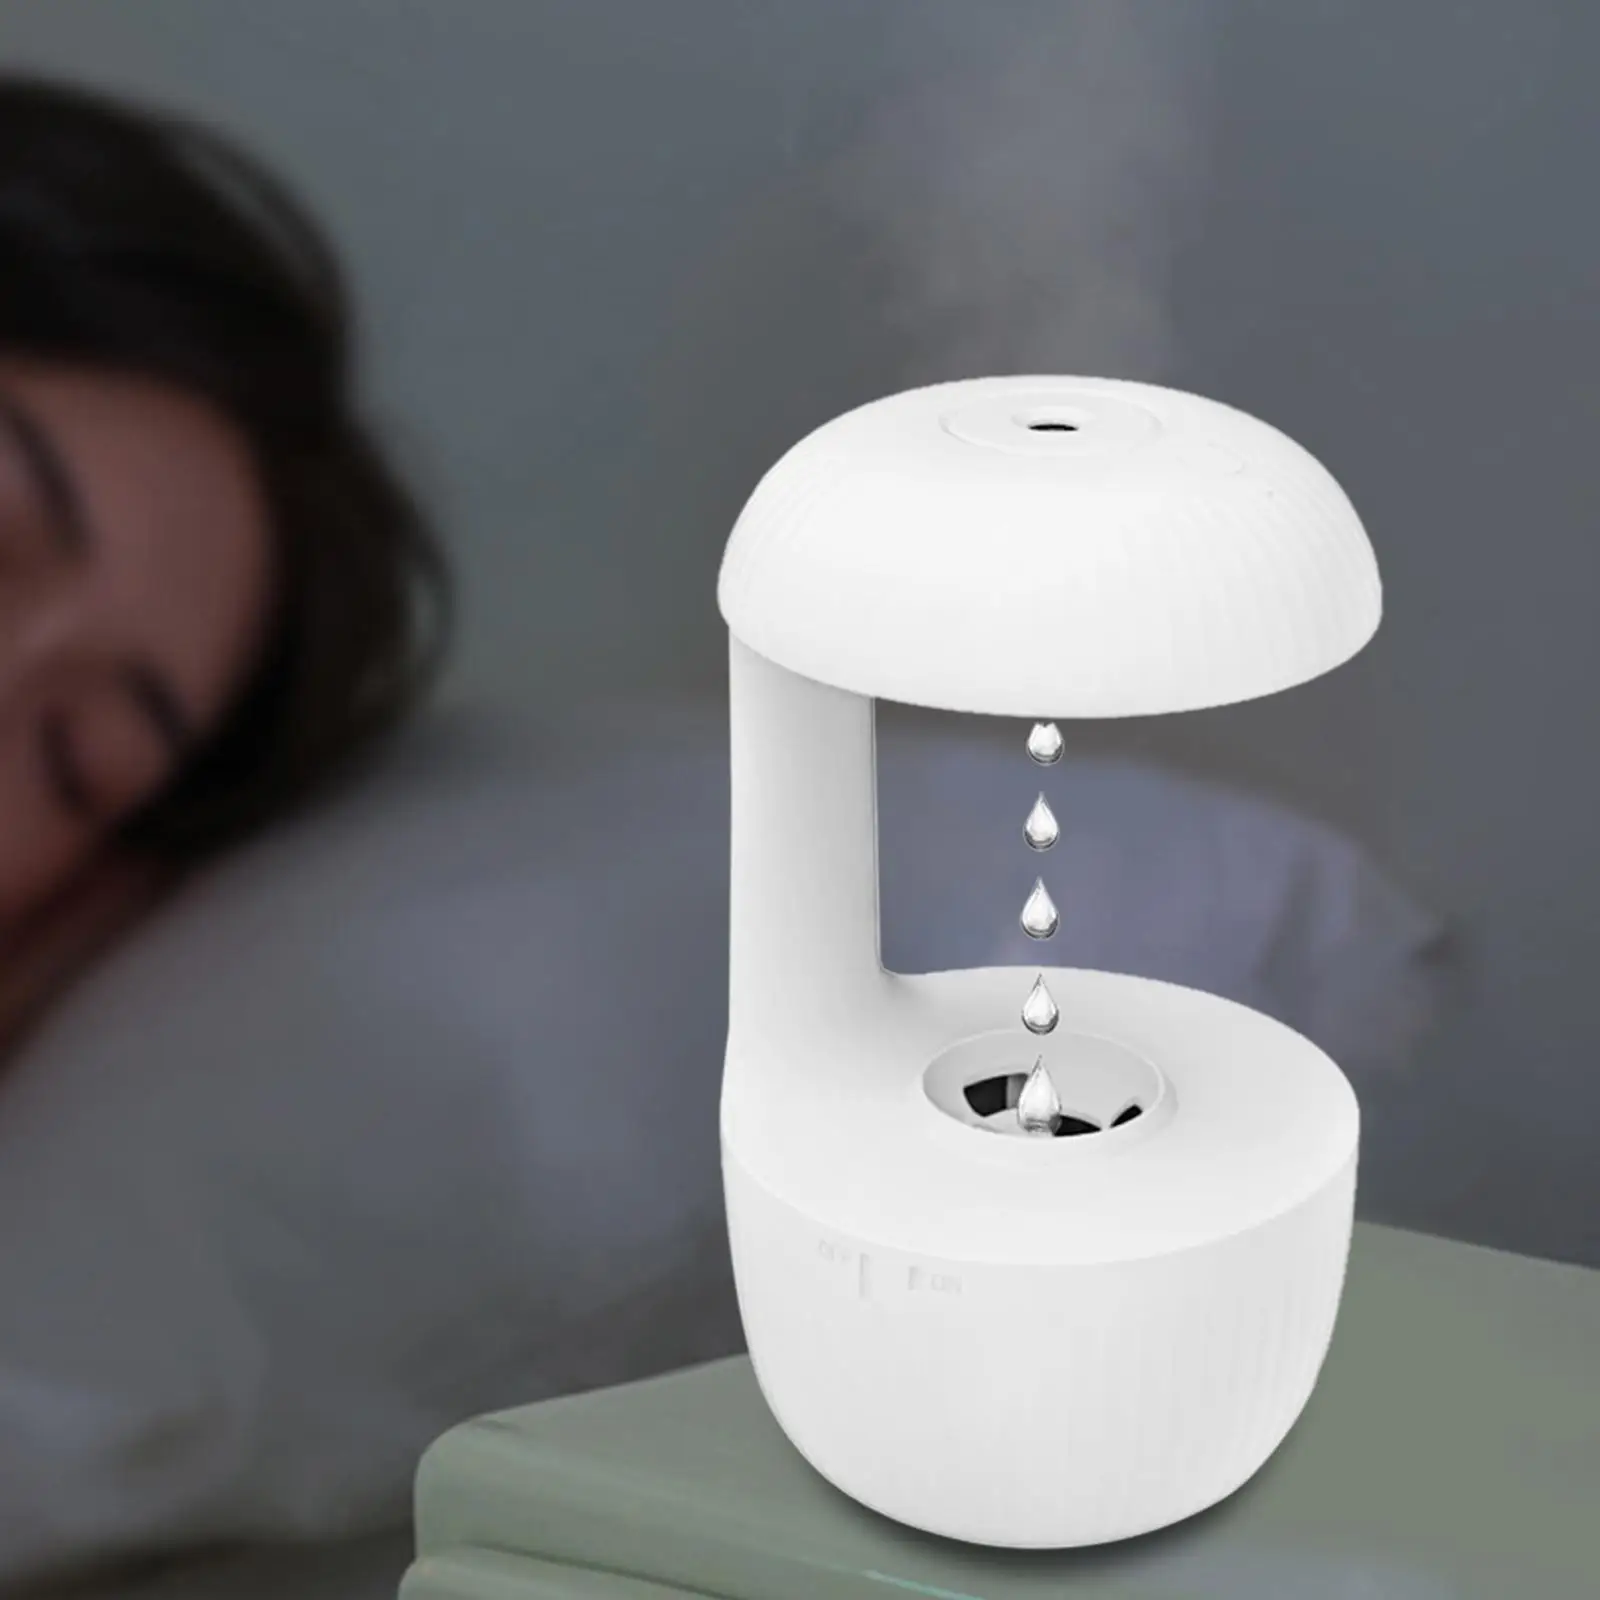 Portable Air Humidifier 600ml Levitating Water Drops Fine Mist Spray USB Quiet Diffuser Personal Humidifier for Office Home